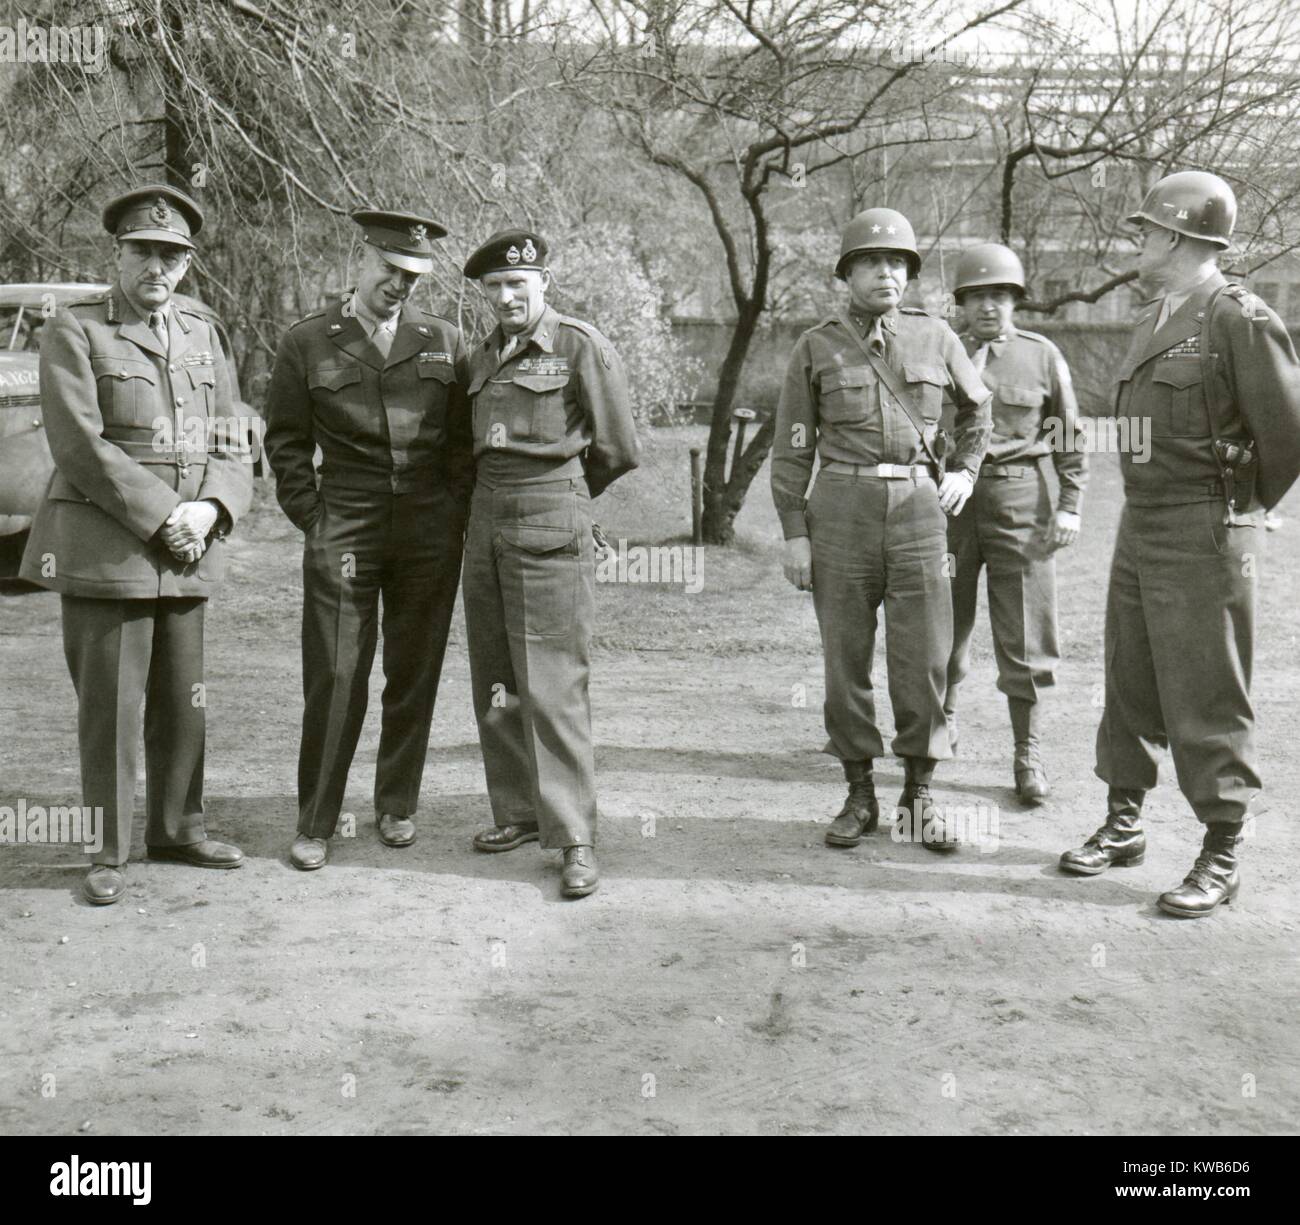 British and American World War 2 Commanders during a visit by Winston Churchill. At XVI Corps Headquarters, Germany, March 25, 1945. L to R: Sir Alan Brooke, Dwight Eisenhower, Sir Bernard Montgomery, John B. Anderson, unidentified, and Omar Bradley. (BSLOC_2014_8_112) Stock Photo